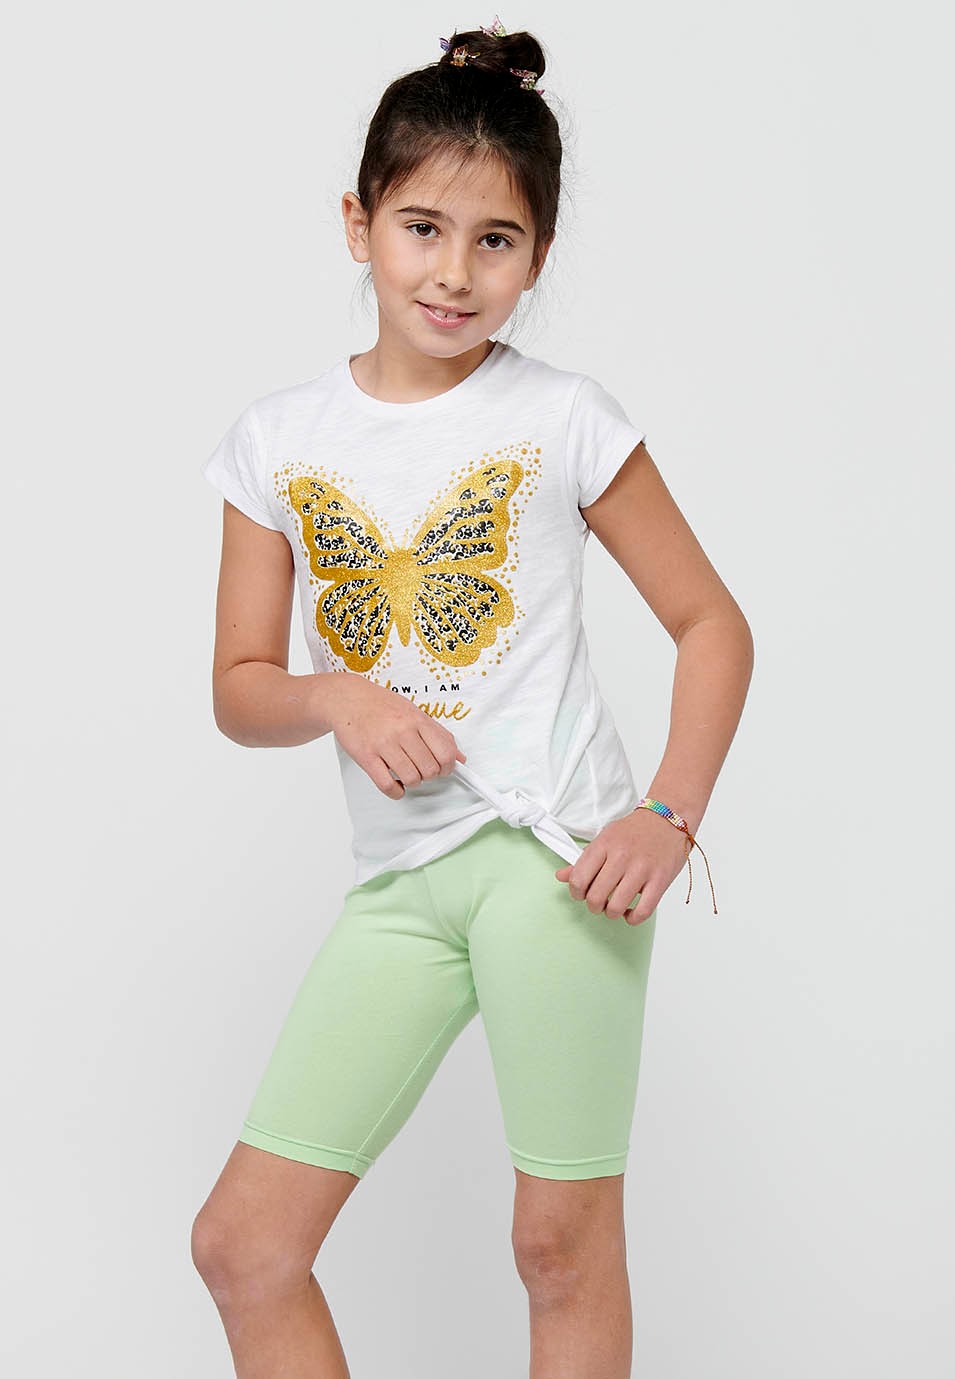 Short-sleeved T-shirt Round Neck Cotton Top with Front Print and White Front Detail for Girls 7